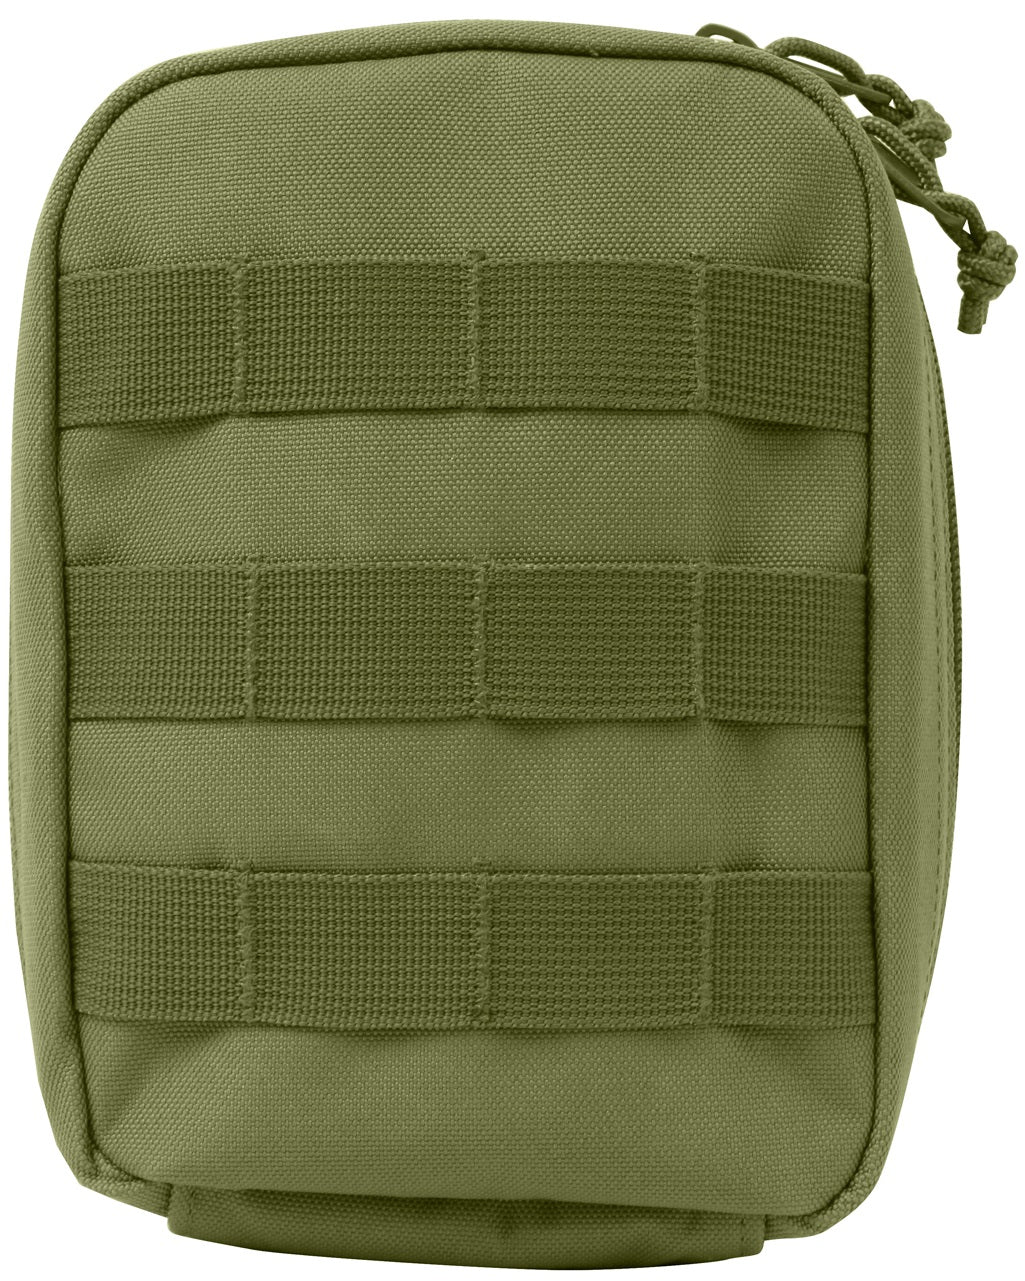 Rothco MOLLE Tactical First Aid Kit - Olive Drab